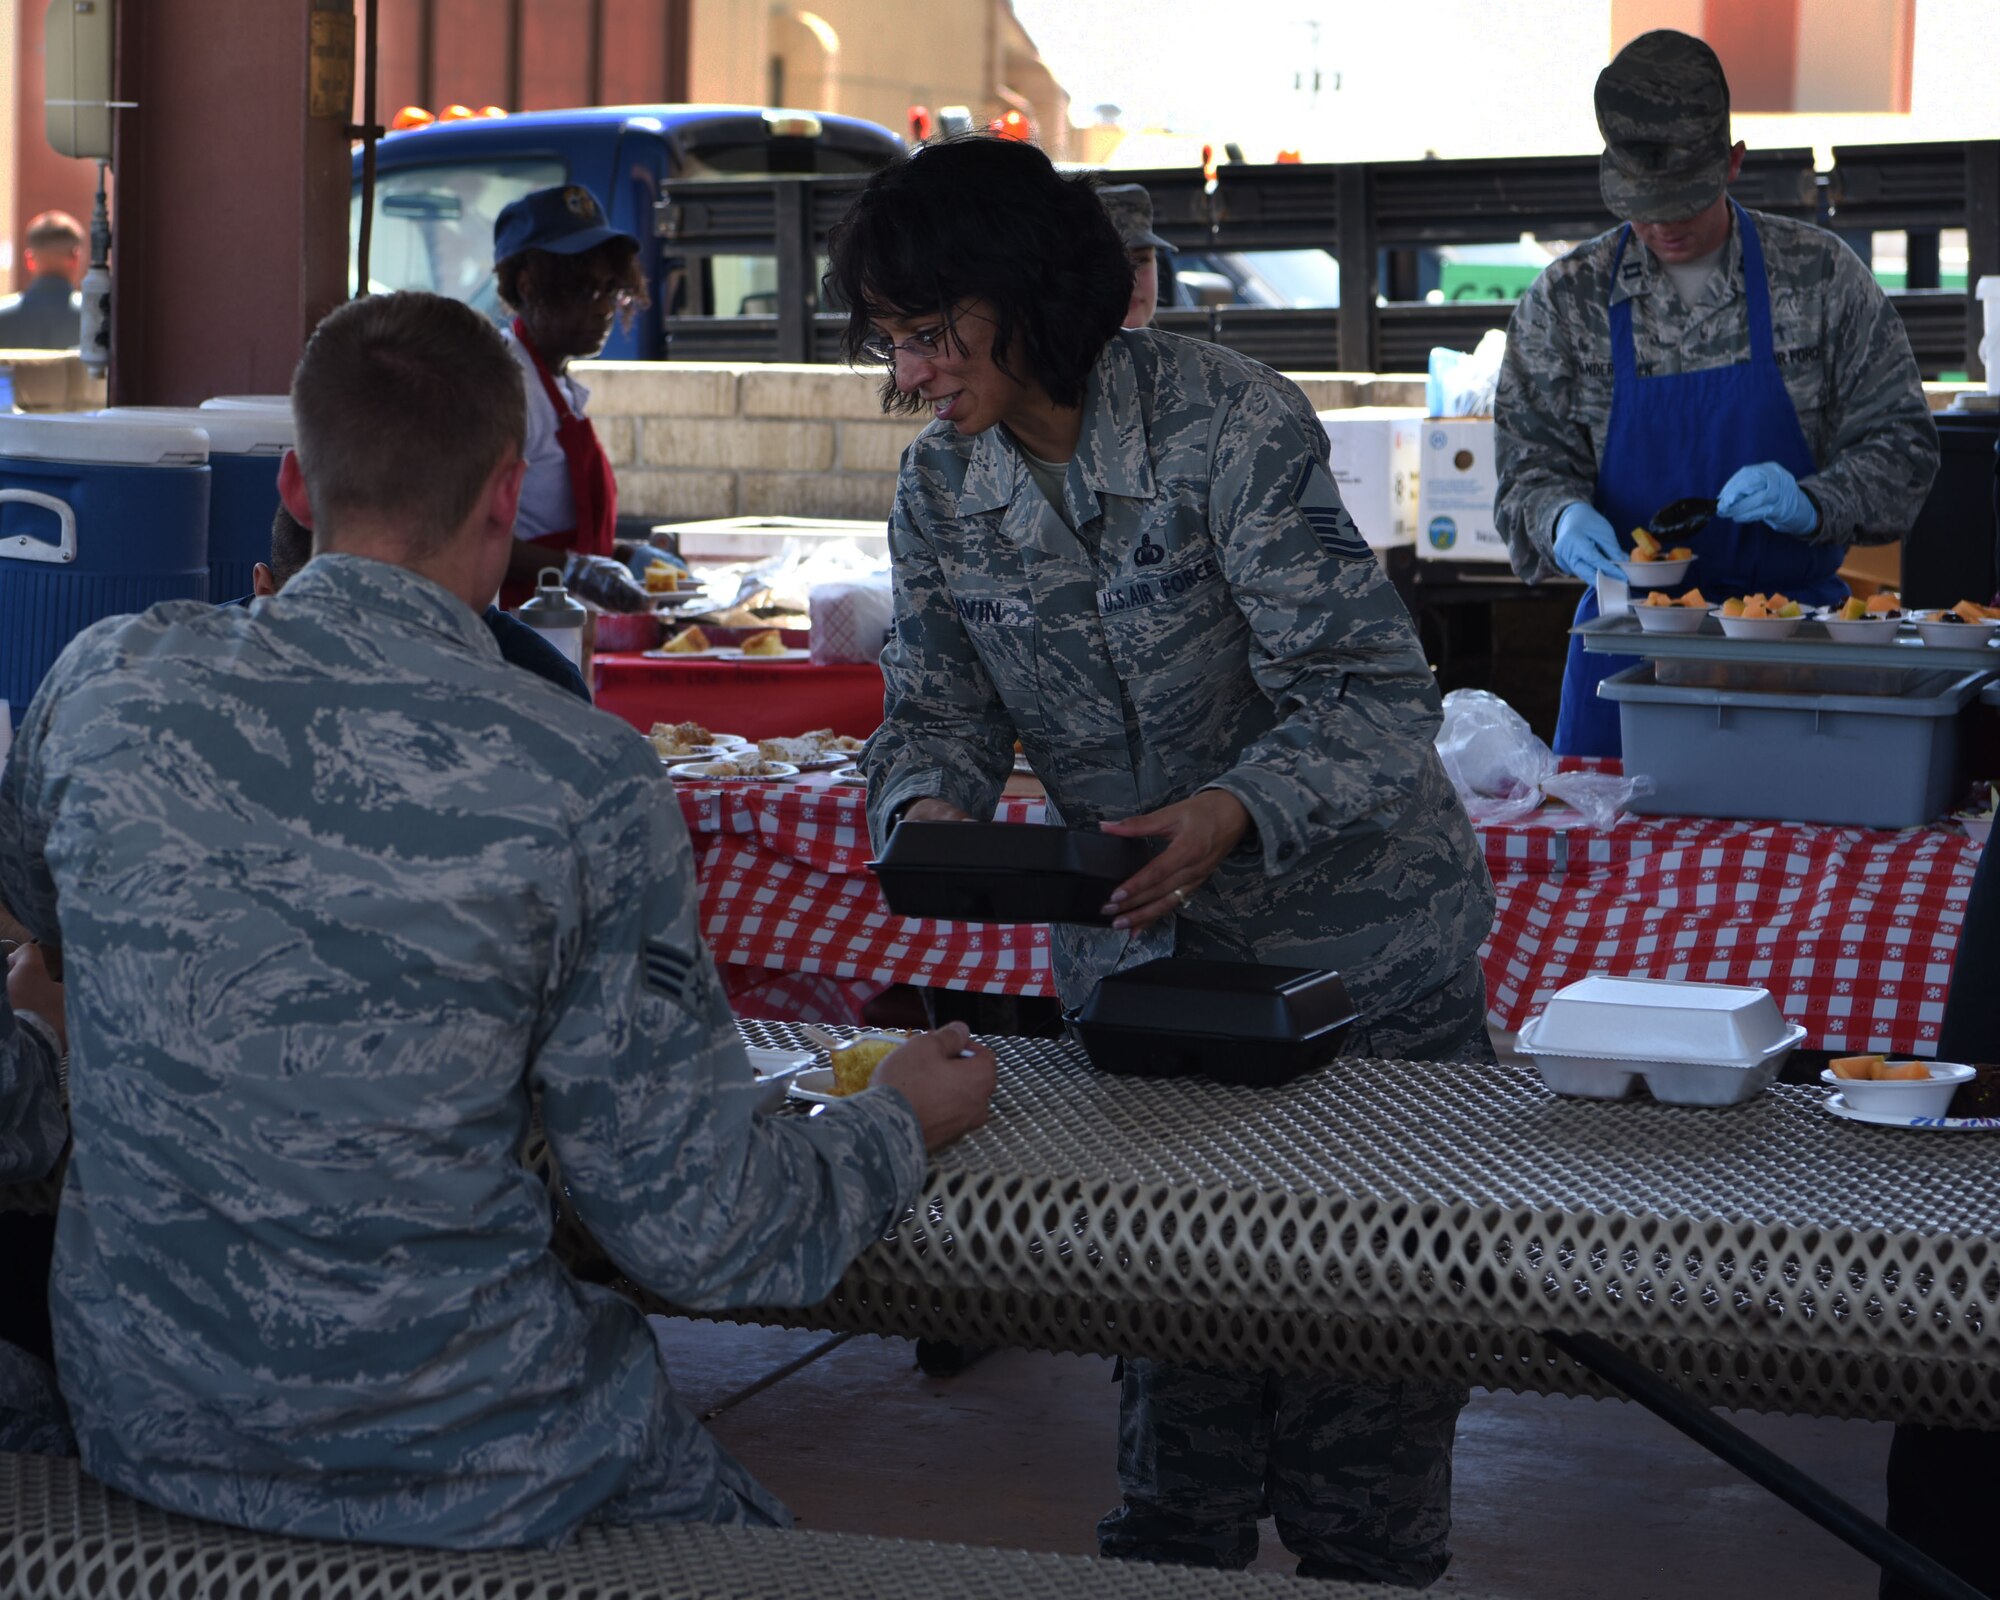 Master Sgt. Melissa Gavin, 56th Fighter Wing Chaplain office superintendent of religious affairs, prepares to-go meals for Airmen during the Flightline Feast Sept. 6, 2018, at Luke Air Force Base, Ariz.